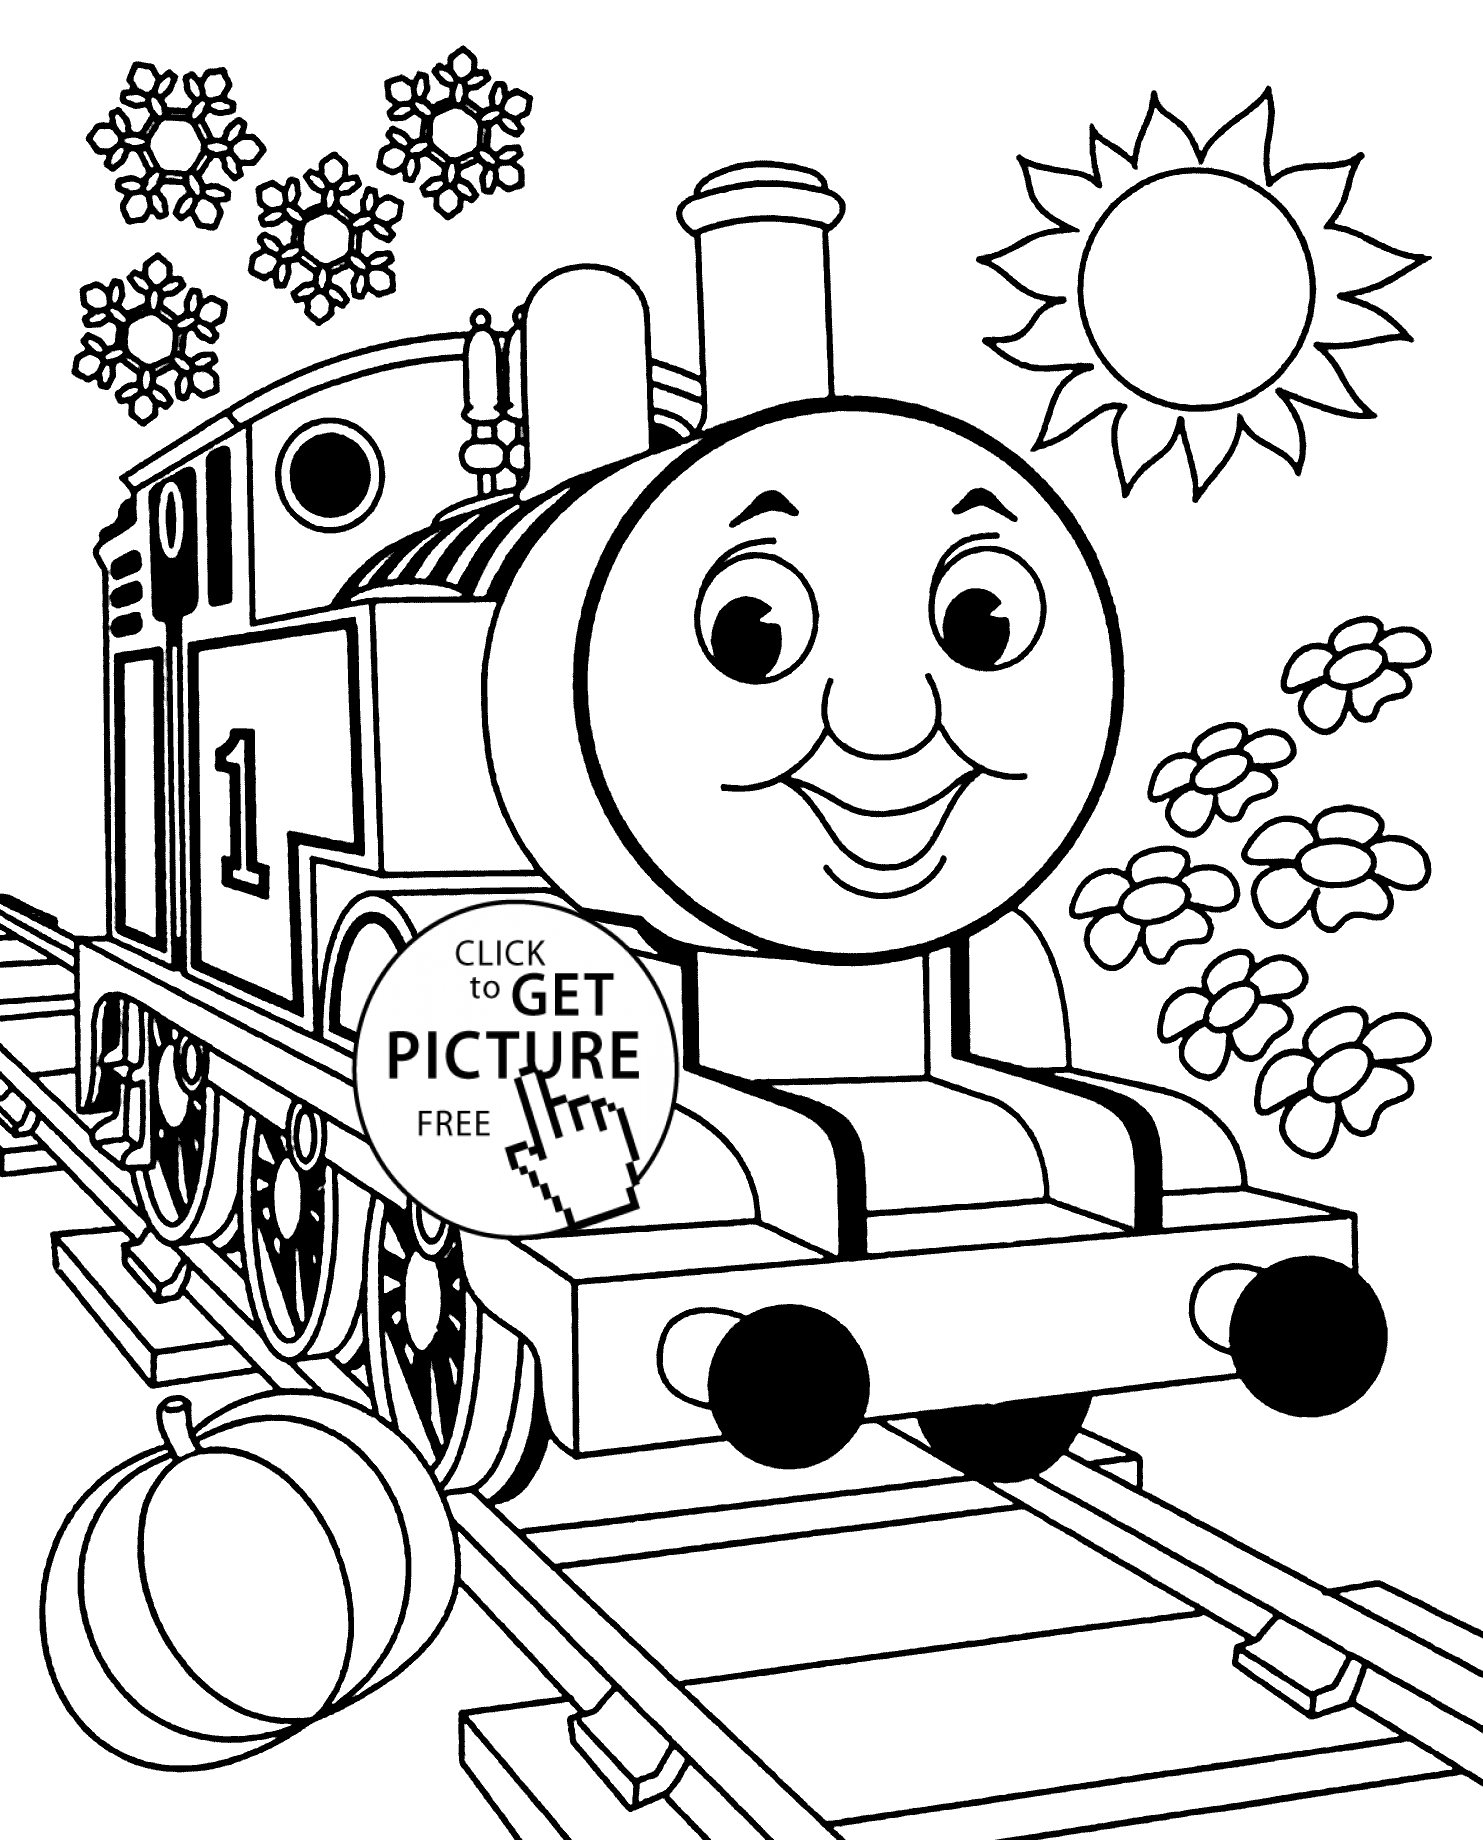 Thomas And Friends Coloring Pages Thomas And Friends Coloring Pages For Kids Printable Free Coloing